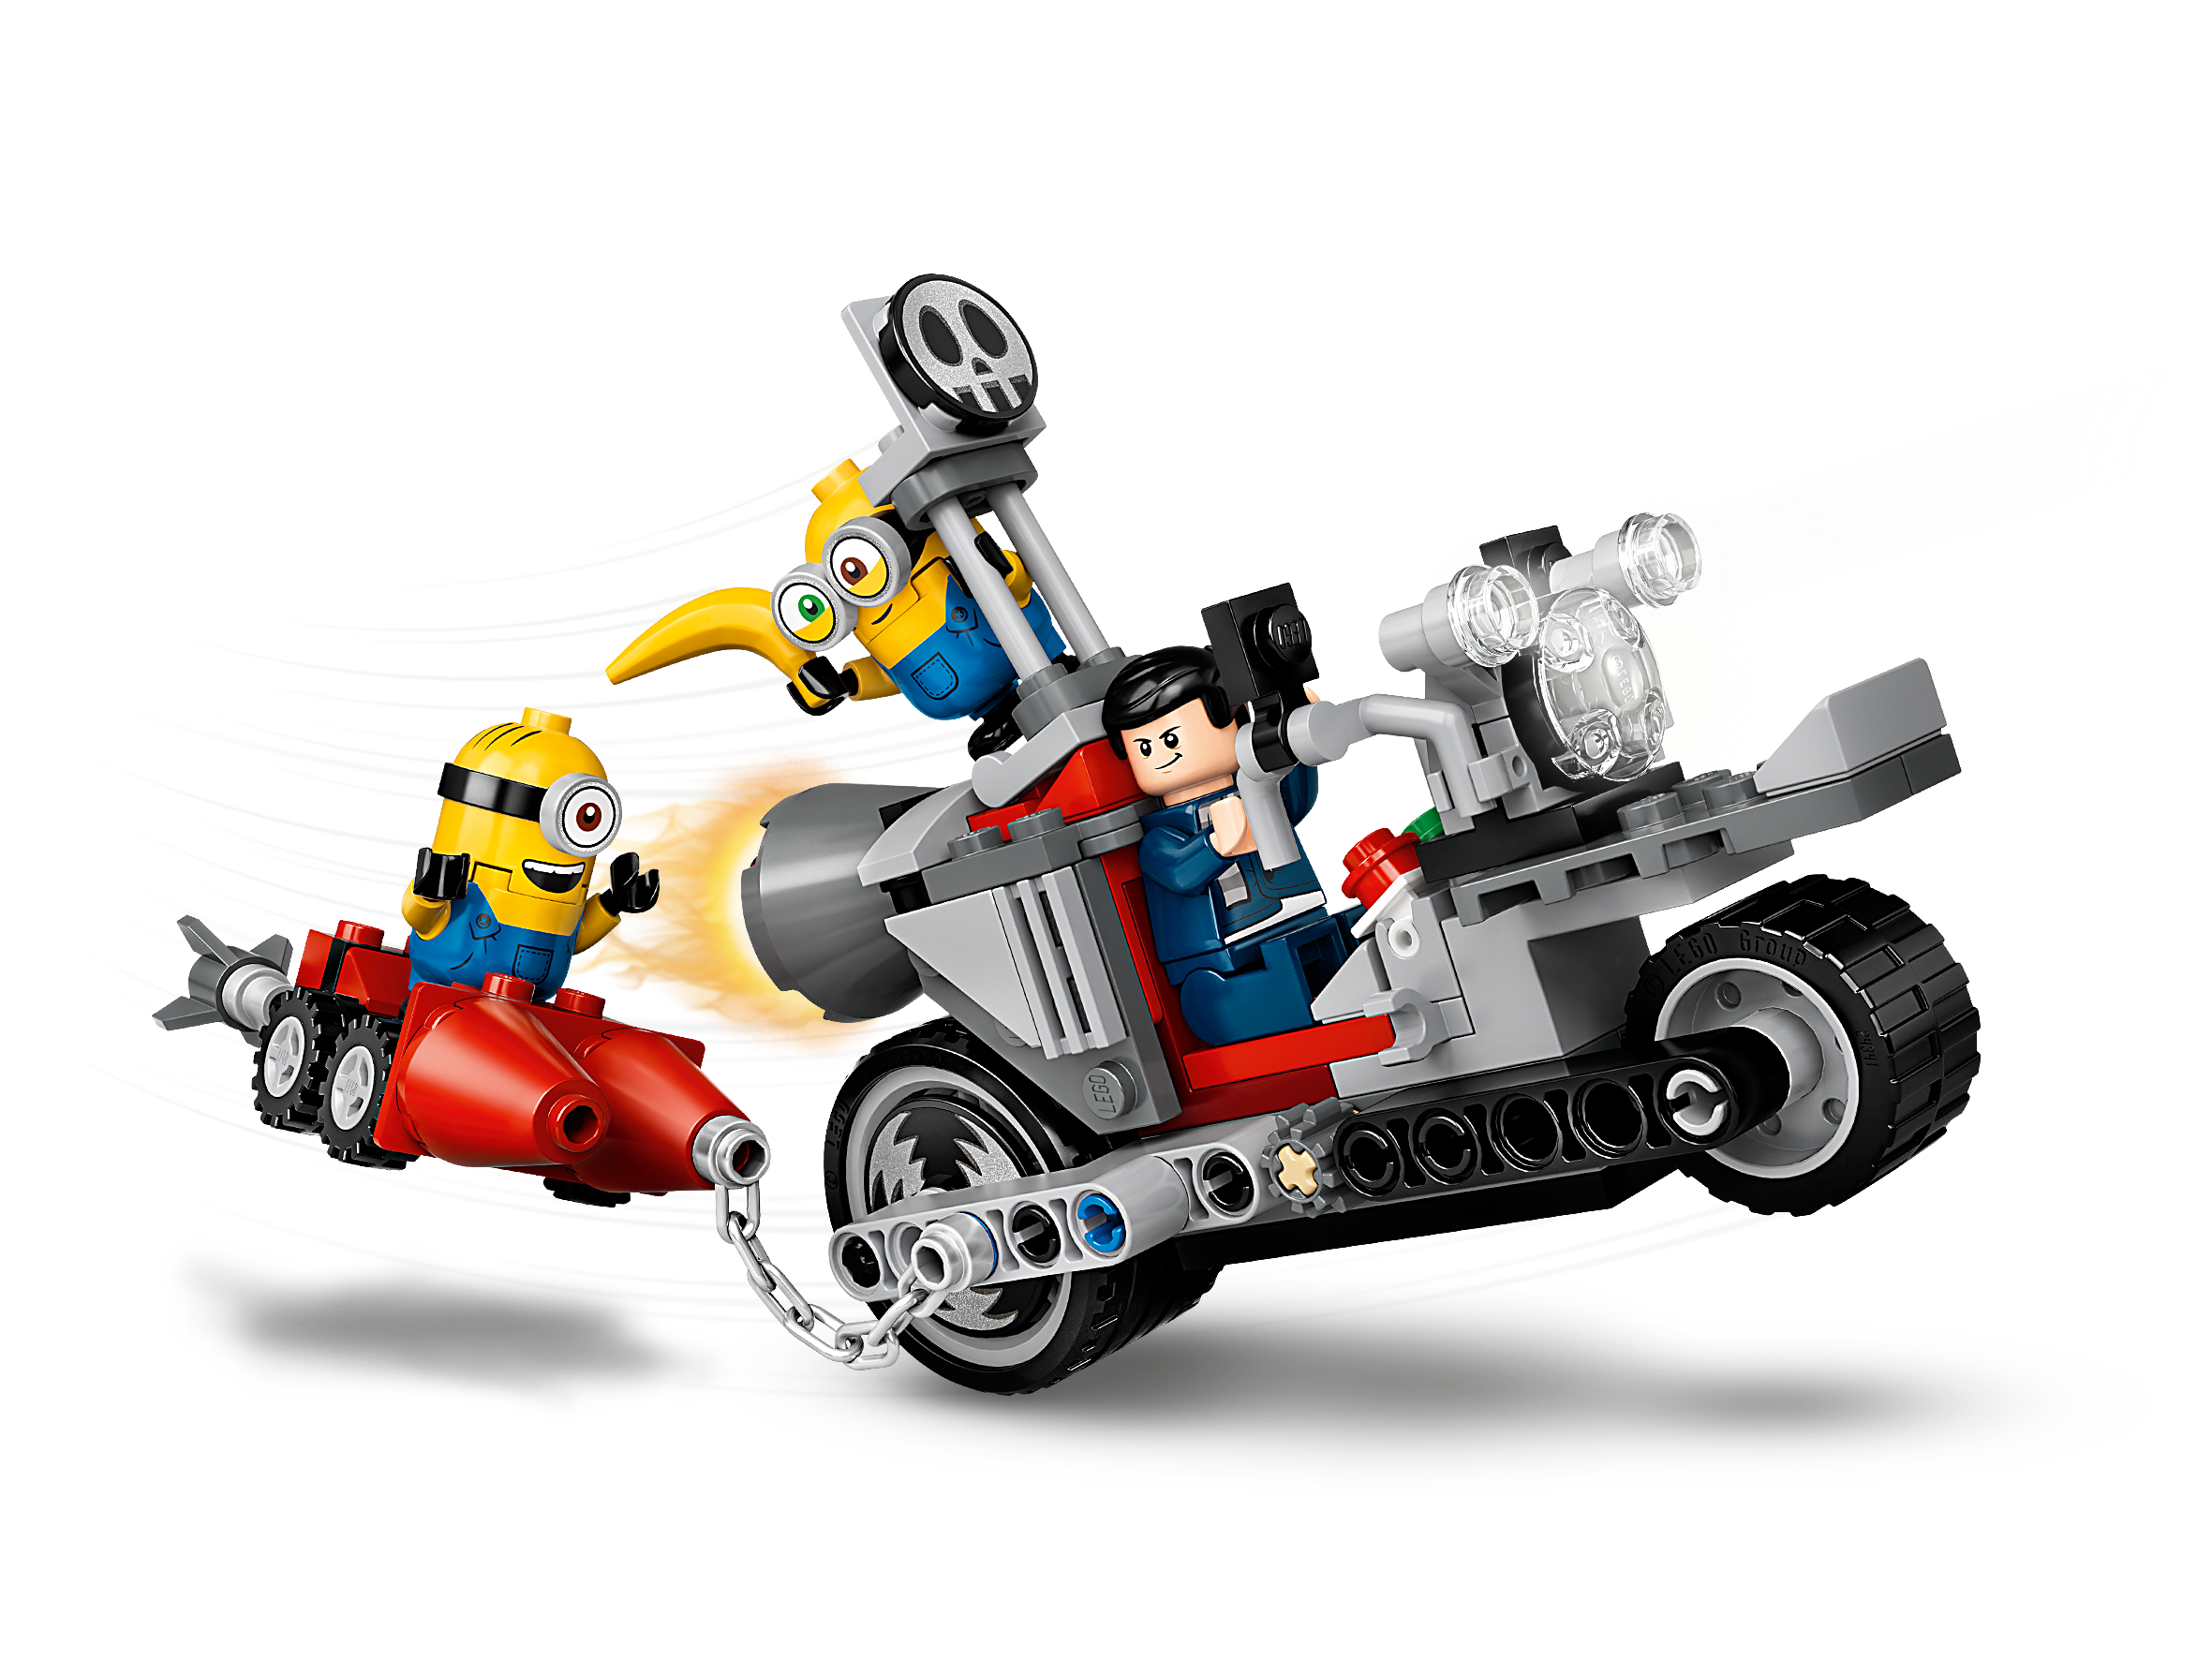 Unstoppable Bike Chase Minions Buy Online At The Official Lego Shop Us